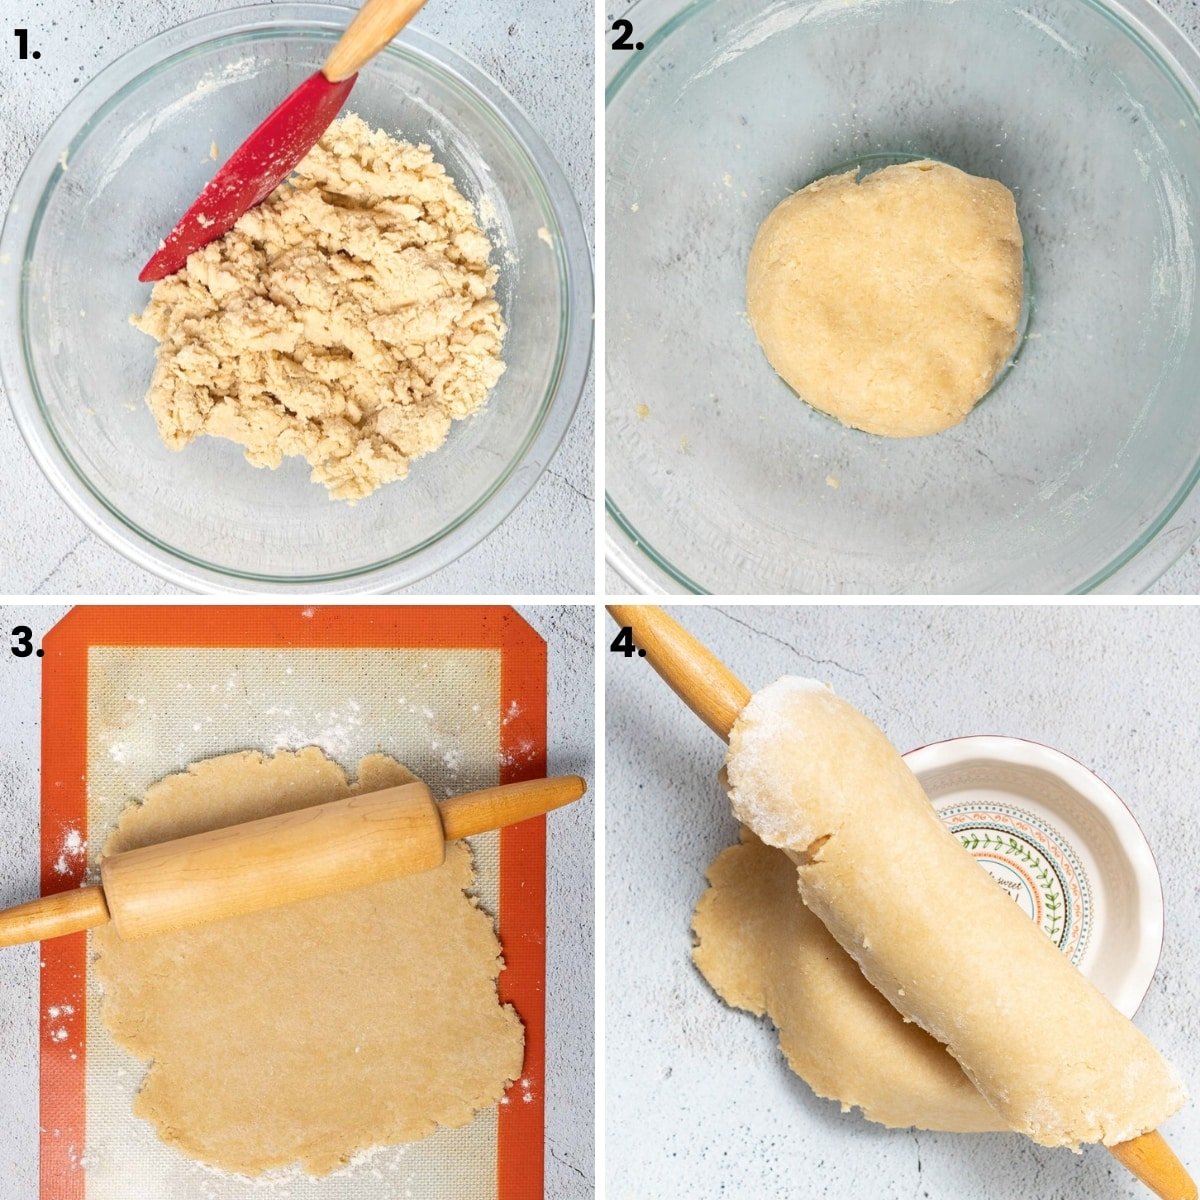 step by step photo for making th epie crust as per the written directions